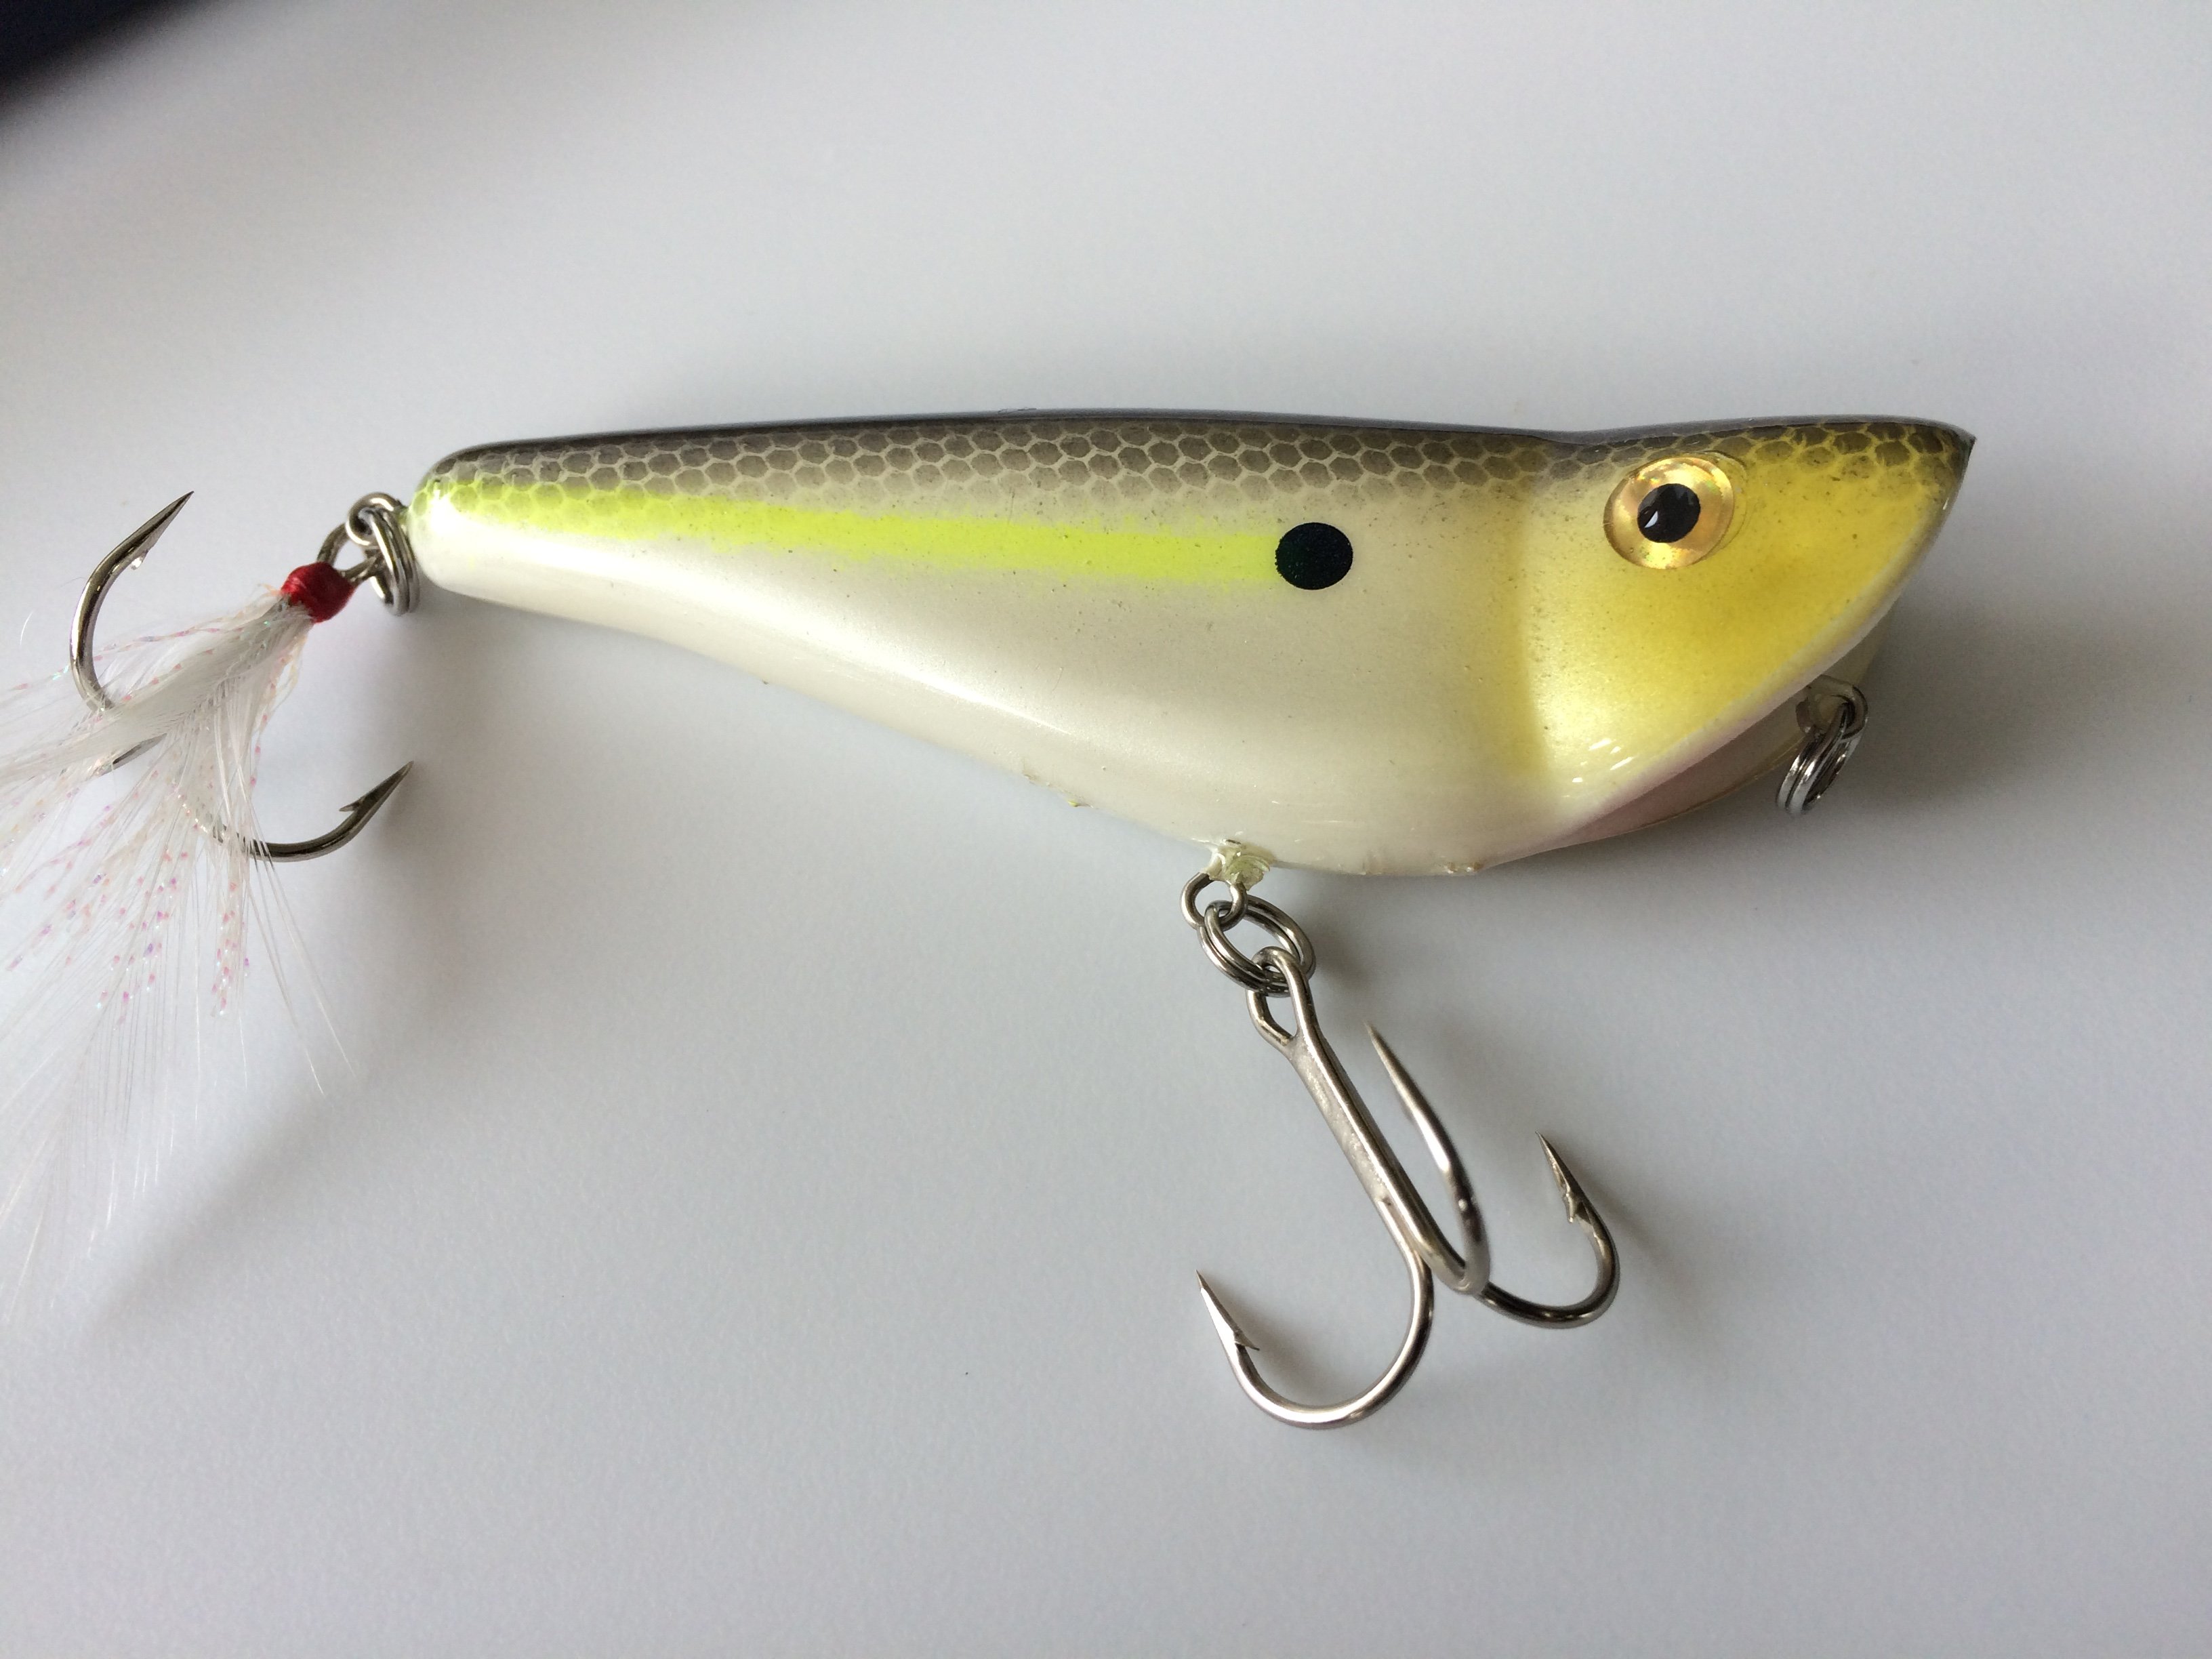 Who makes this lure and what is it called? - General Discussion